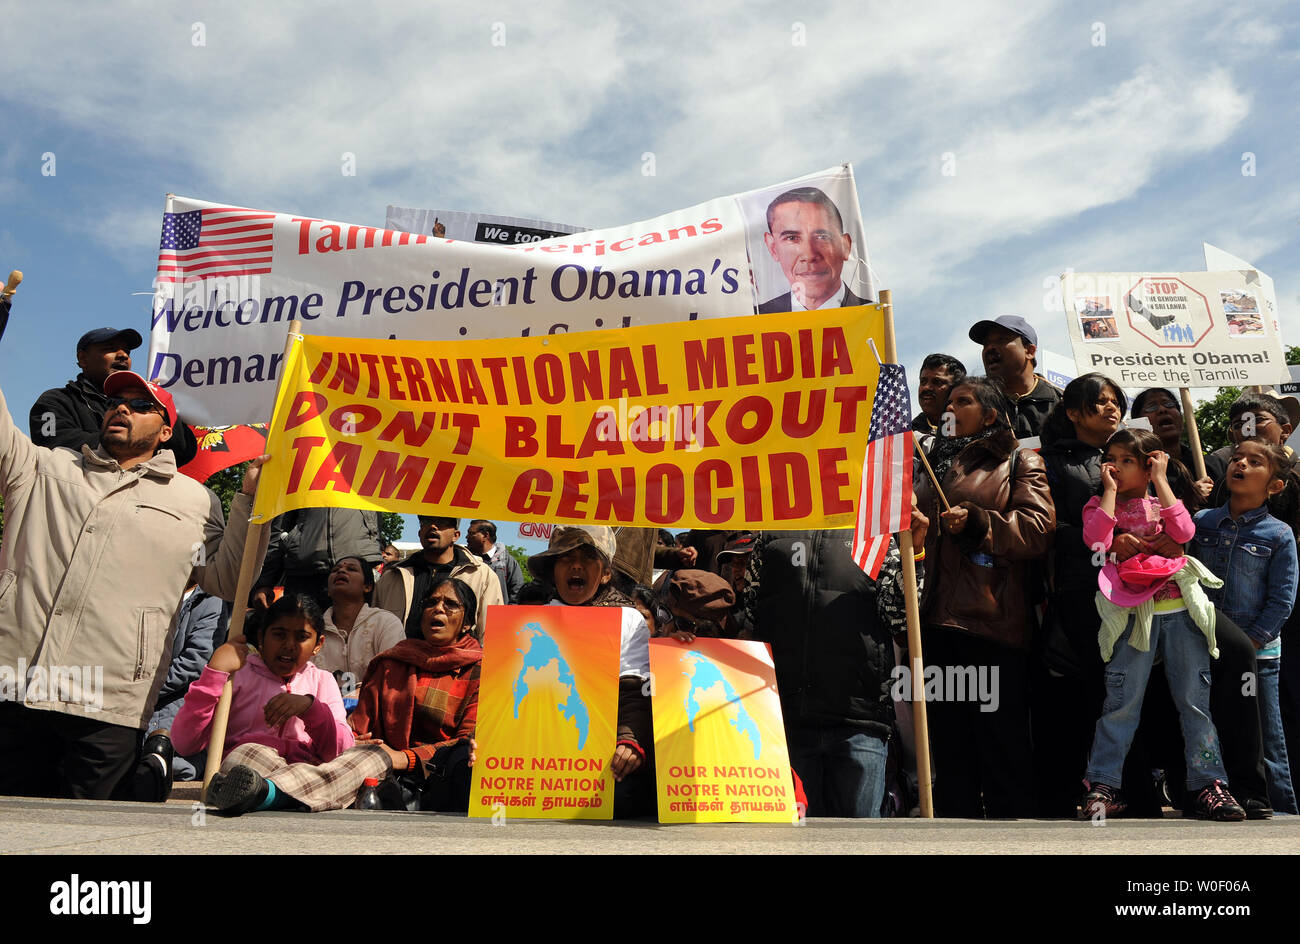 Hundreds of demonstrators call for the end of 'genocide' against the Tamil people in Sri Lanka near the White House in Washington on May 18, 2009.    (UPI Photo/Roger L. Wollenberg) Stock Photo